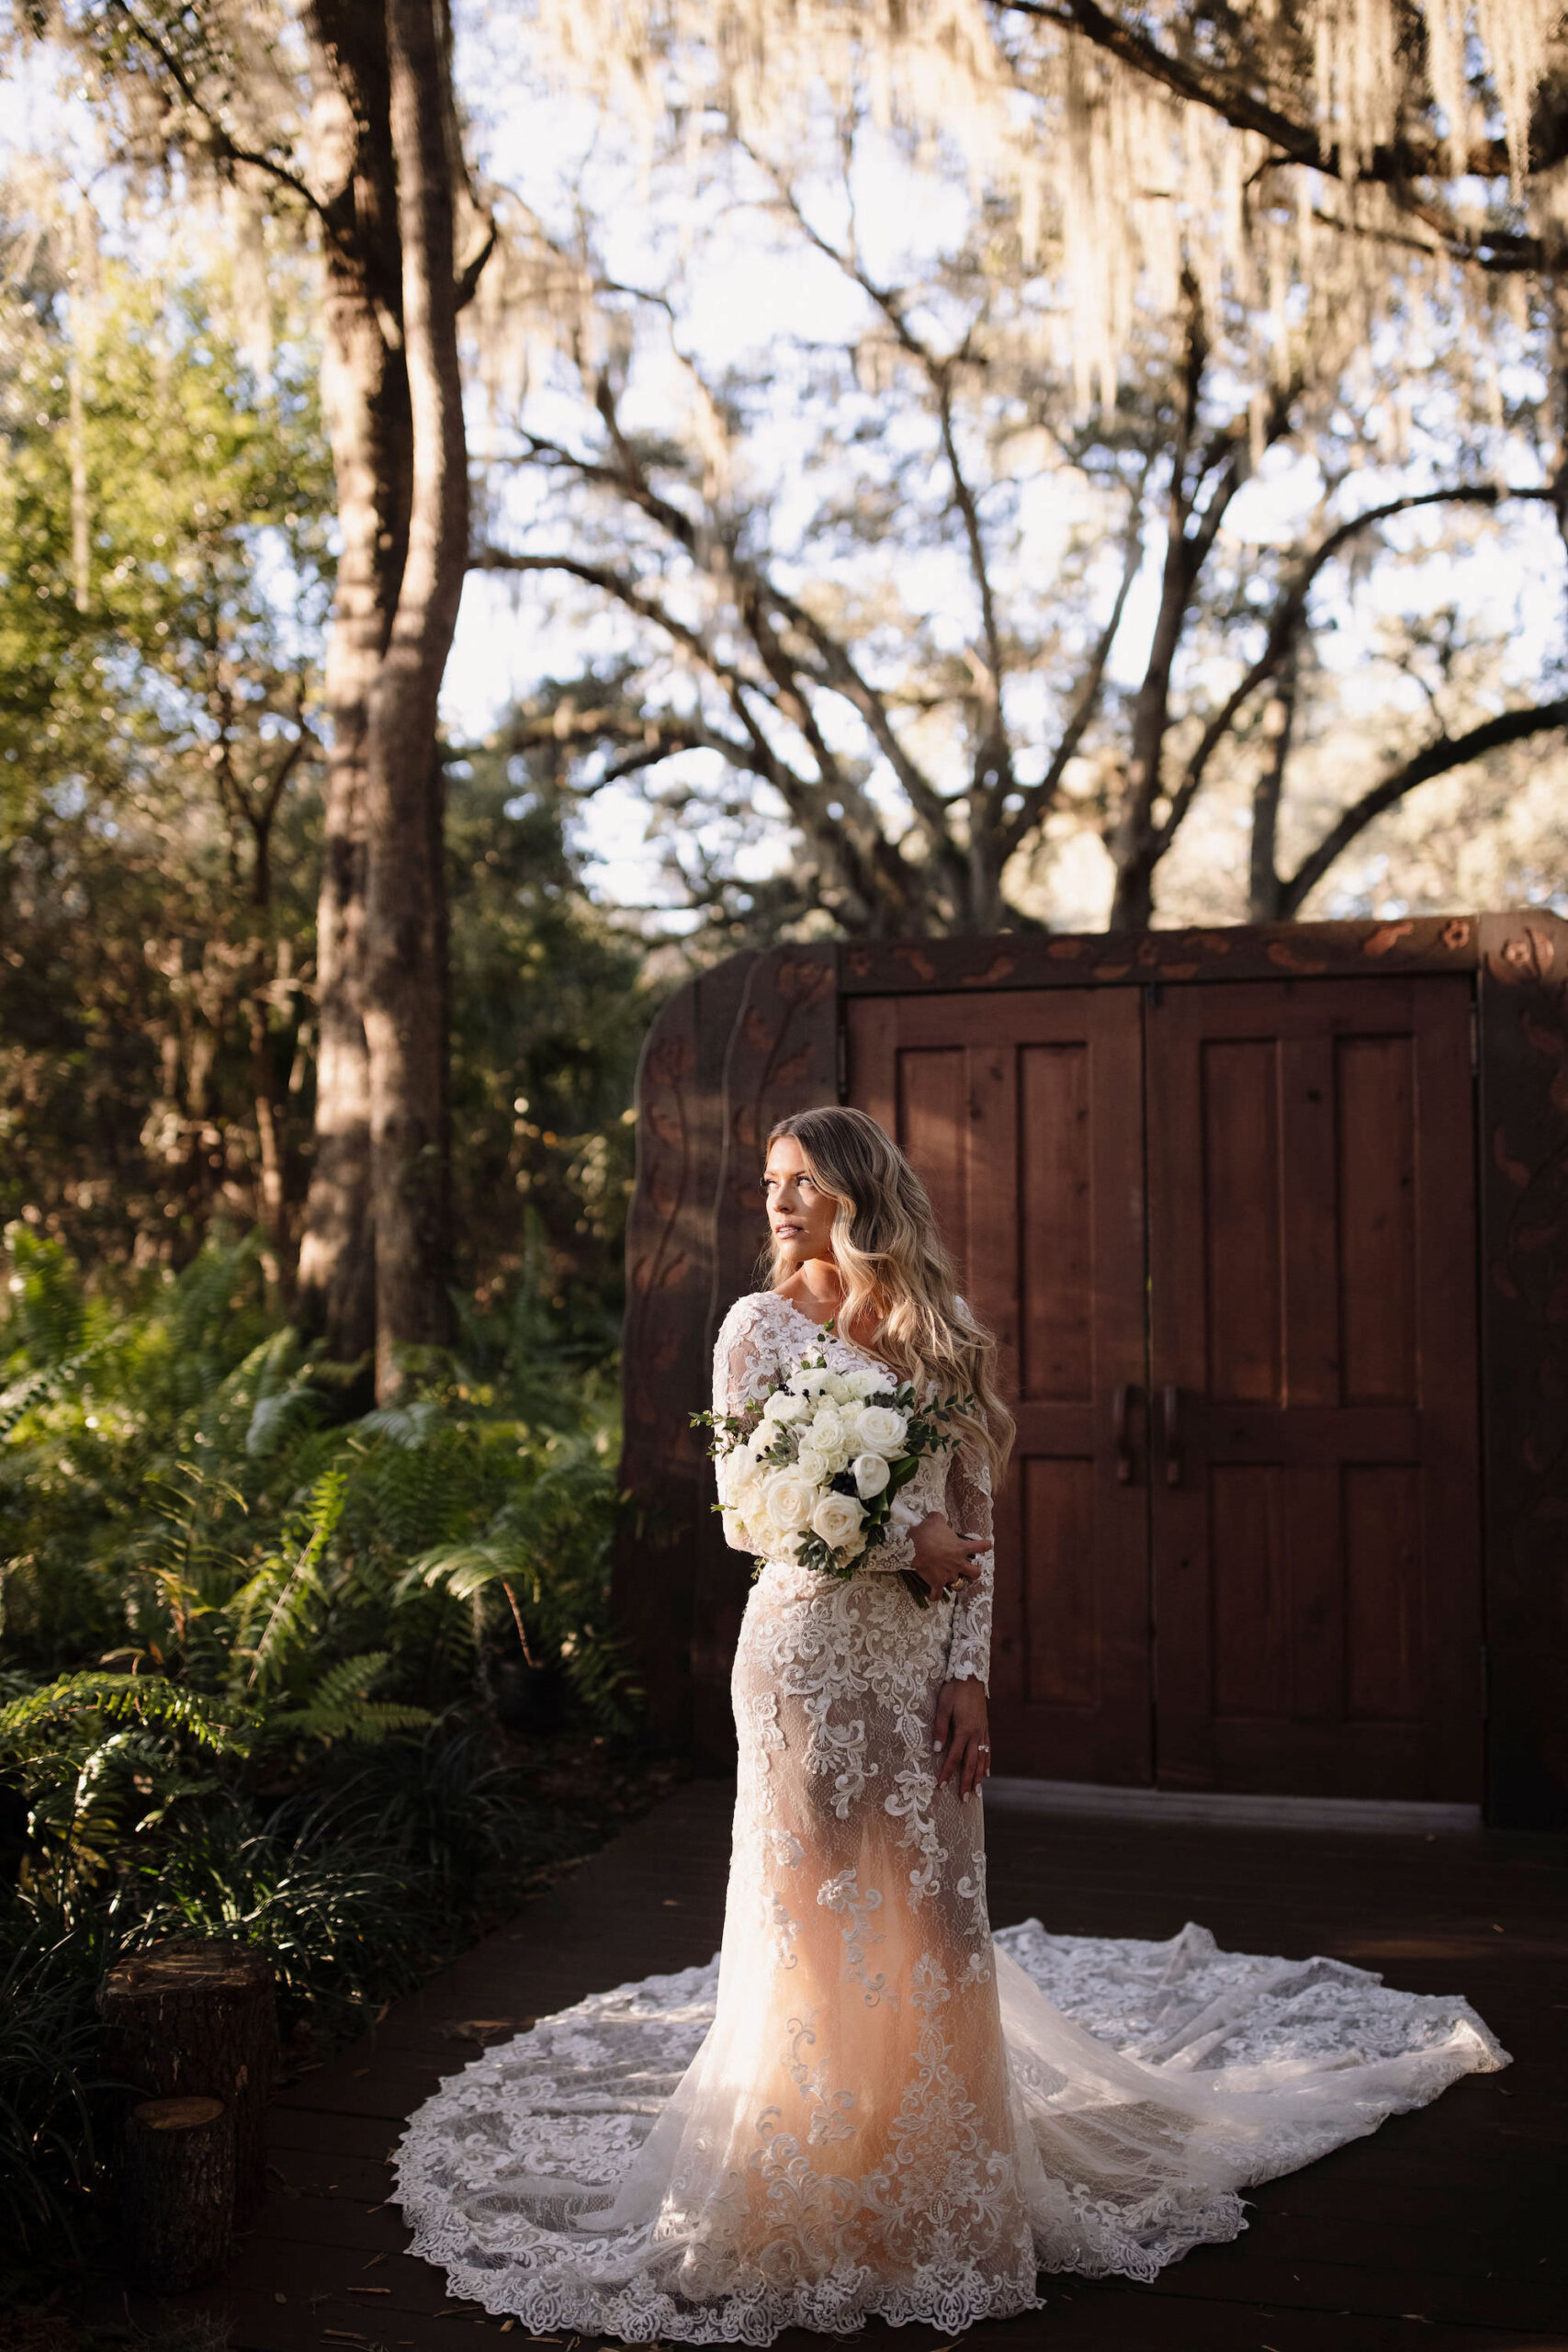 Bridal Glamour Wedding Portrait | Long Sleeve White Ivory Blush Sheer Lace Wedding Dress with Cathedral Train | Tampa Bay Venue Cross Creek Ranch